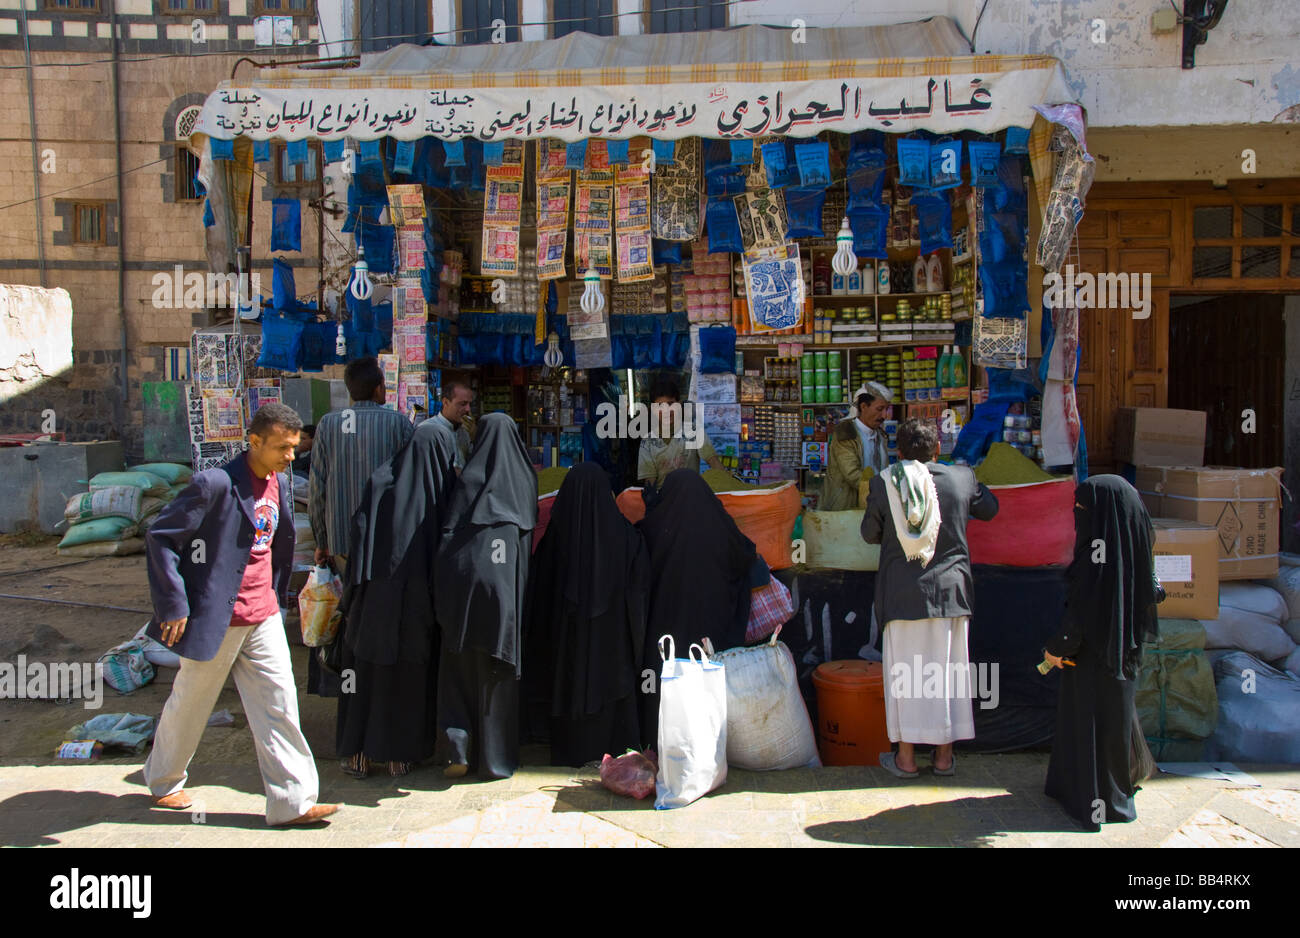 Stand selling henna at Bab Al Yemen market in the old town district of Sana'a Yemen Stock Photo